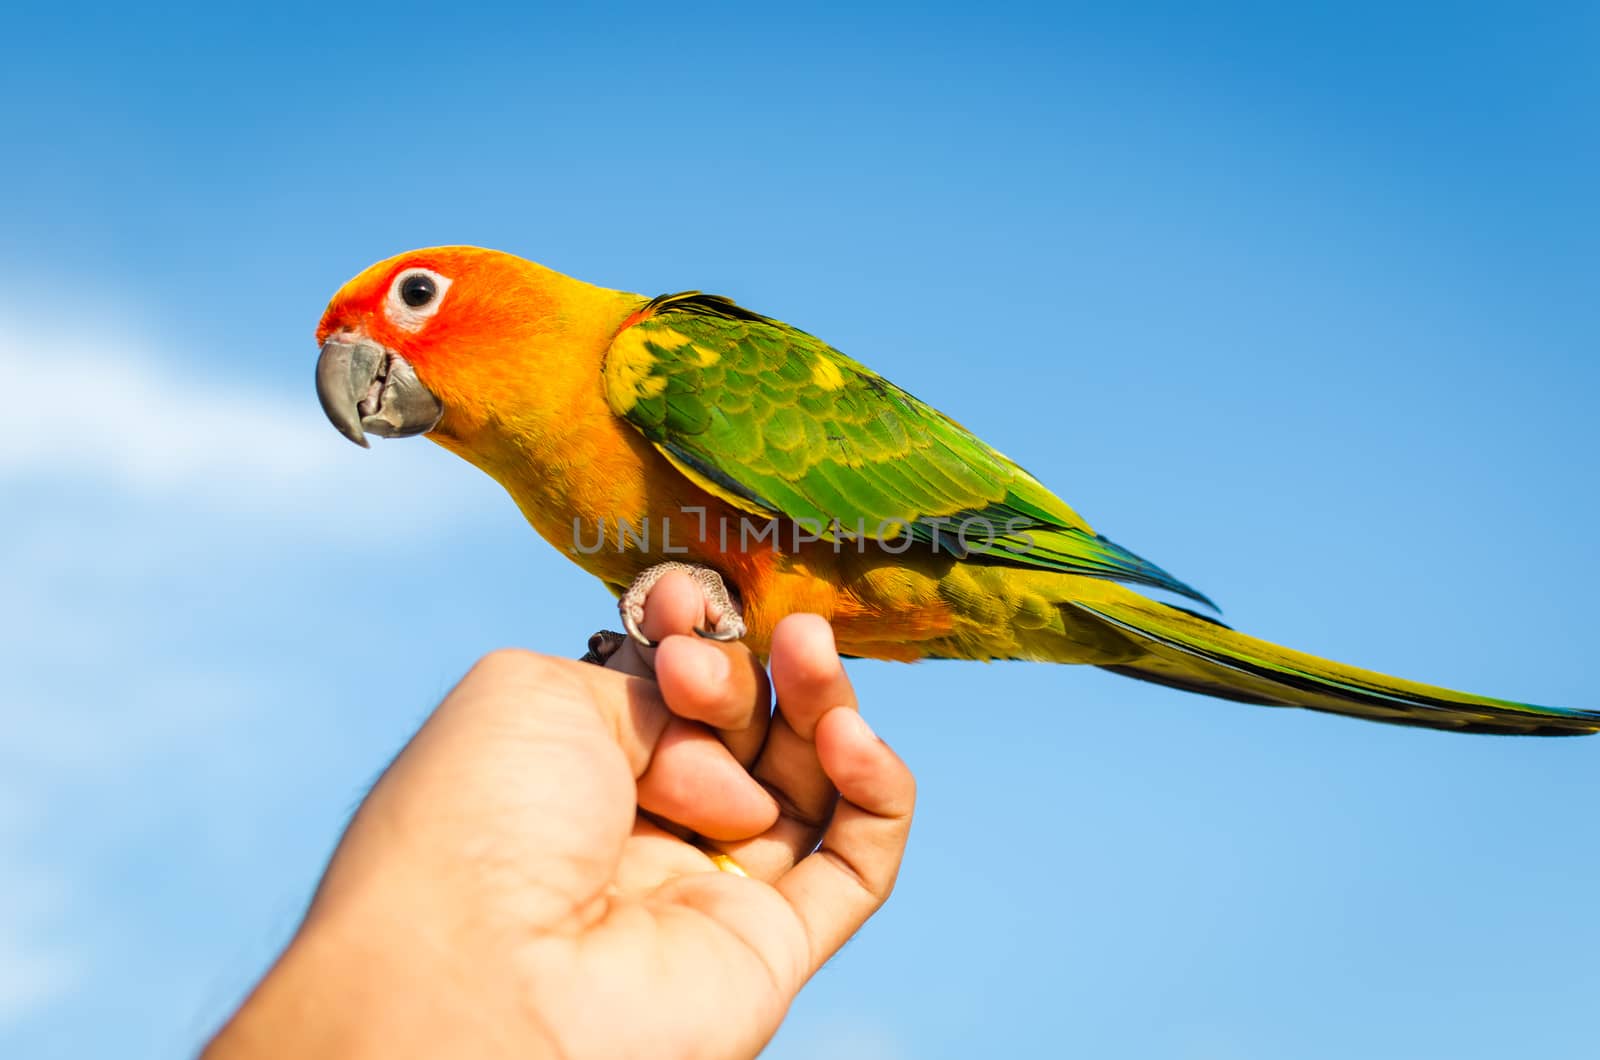 Sun Conure Parrot perched on hand with blue sky.